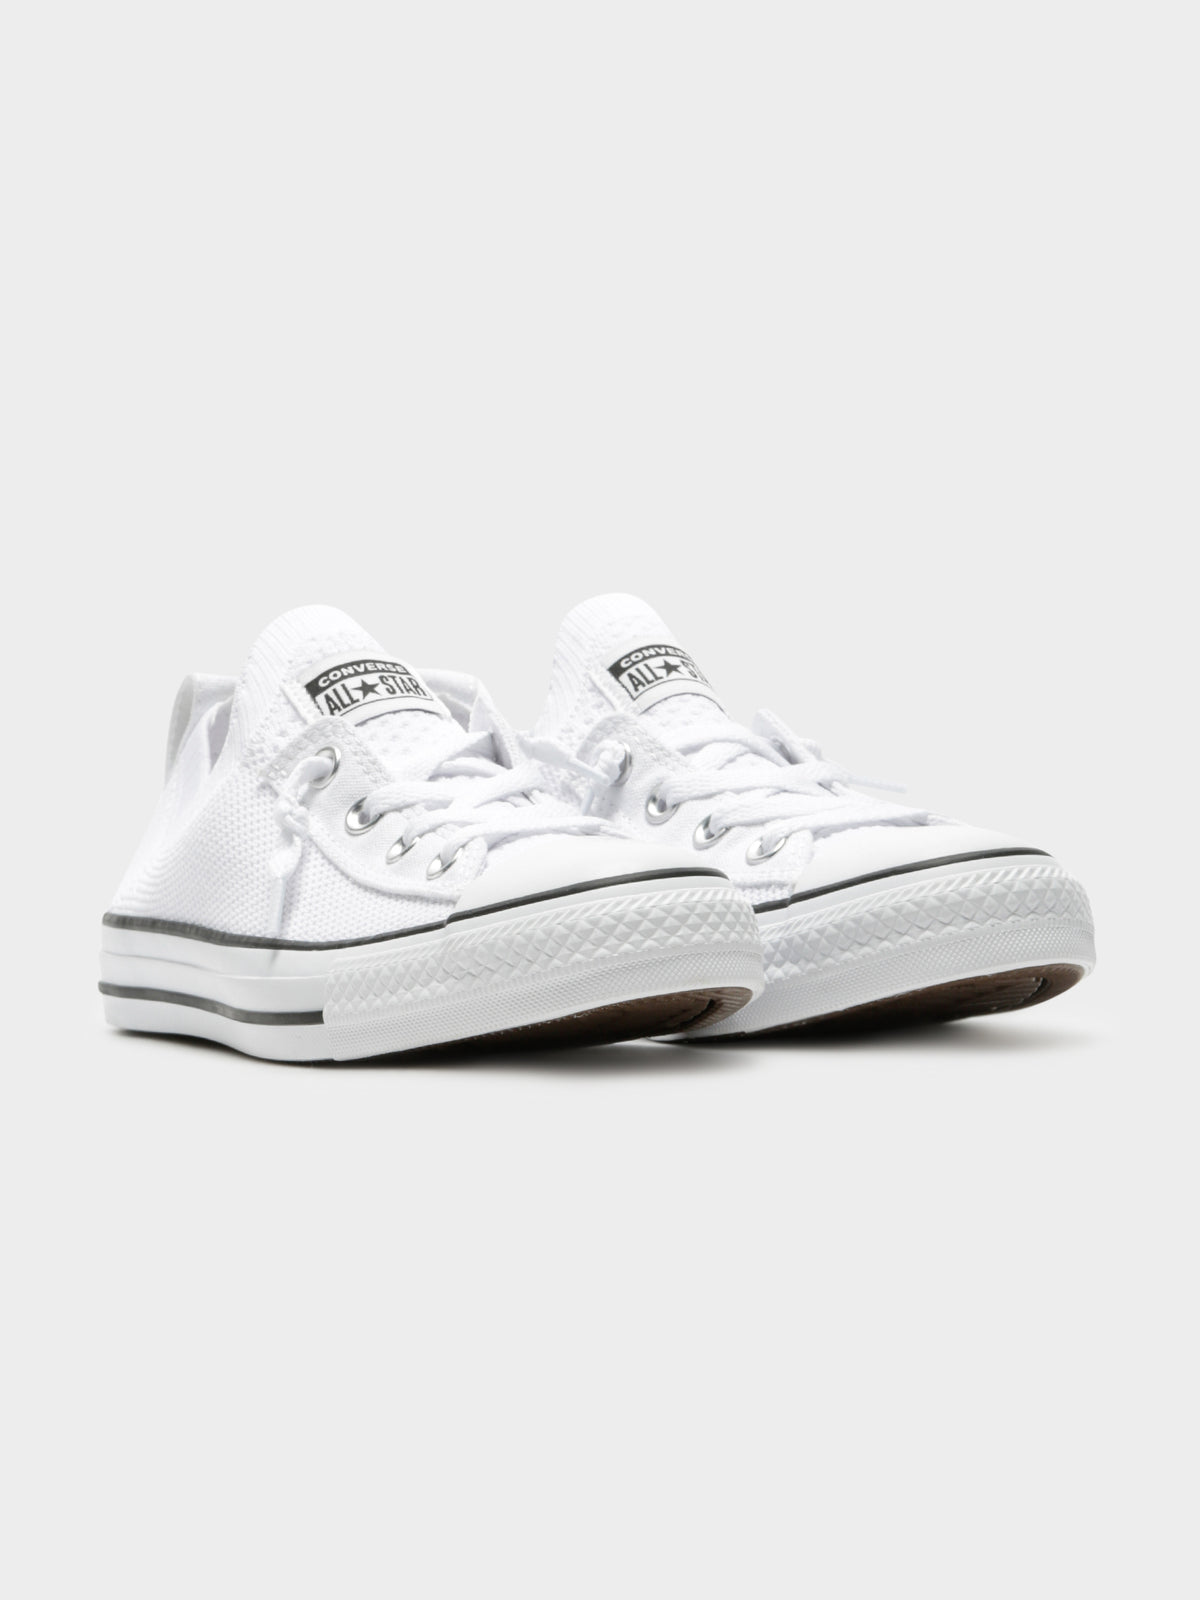 Chuck Taylor All Star Shoreline Knit Slip-On Sneakers in White